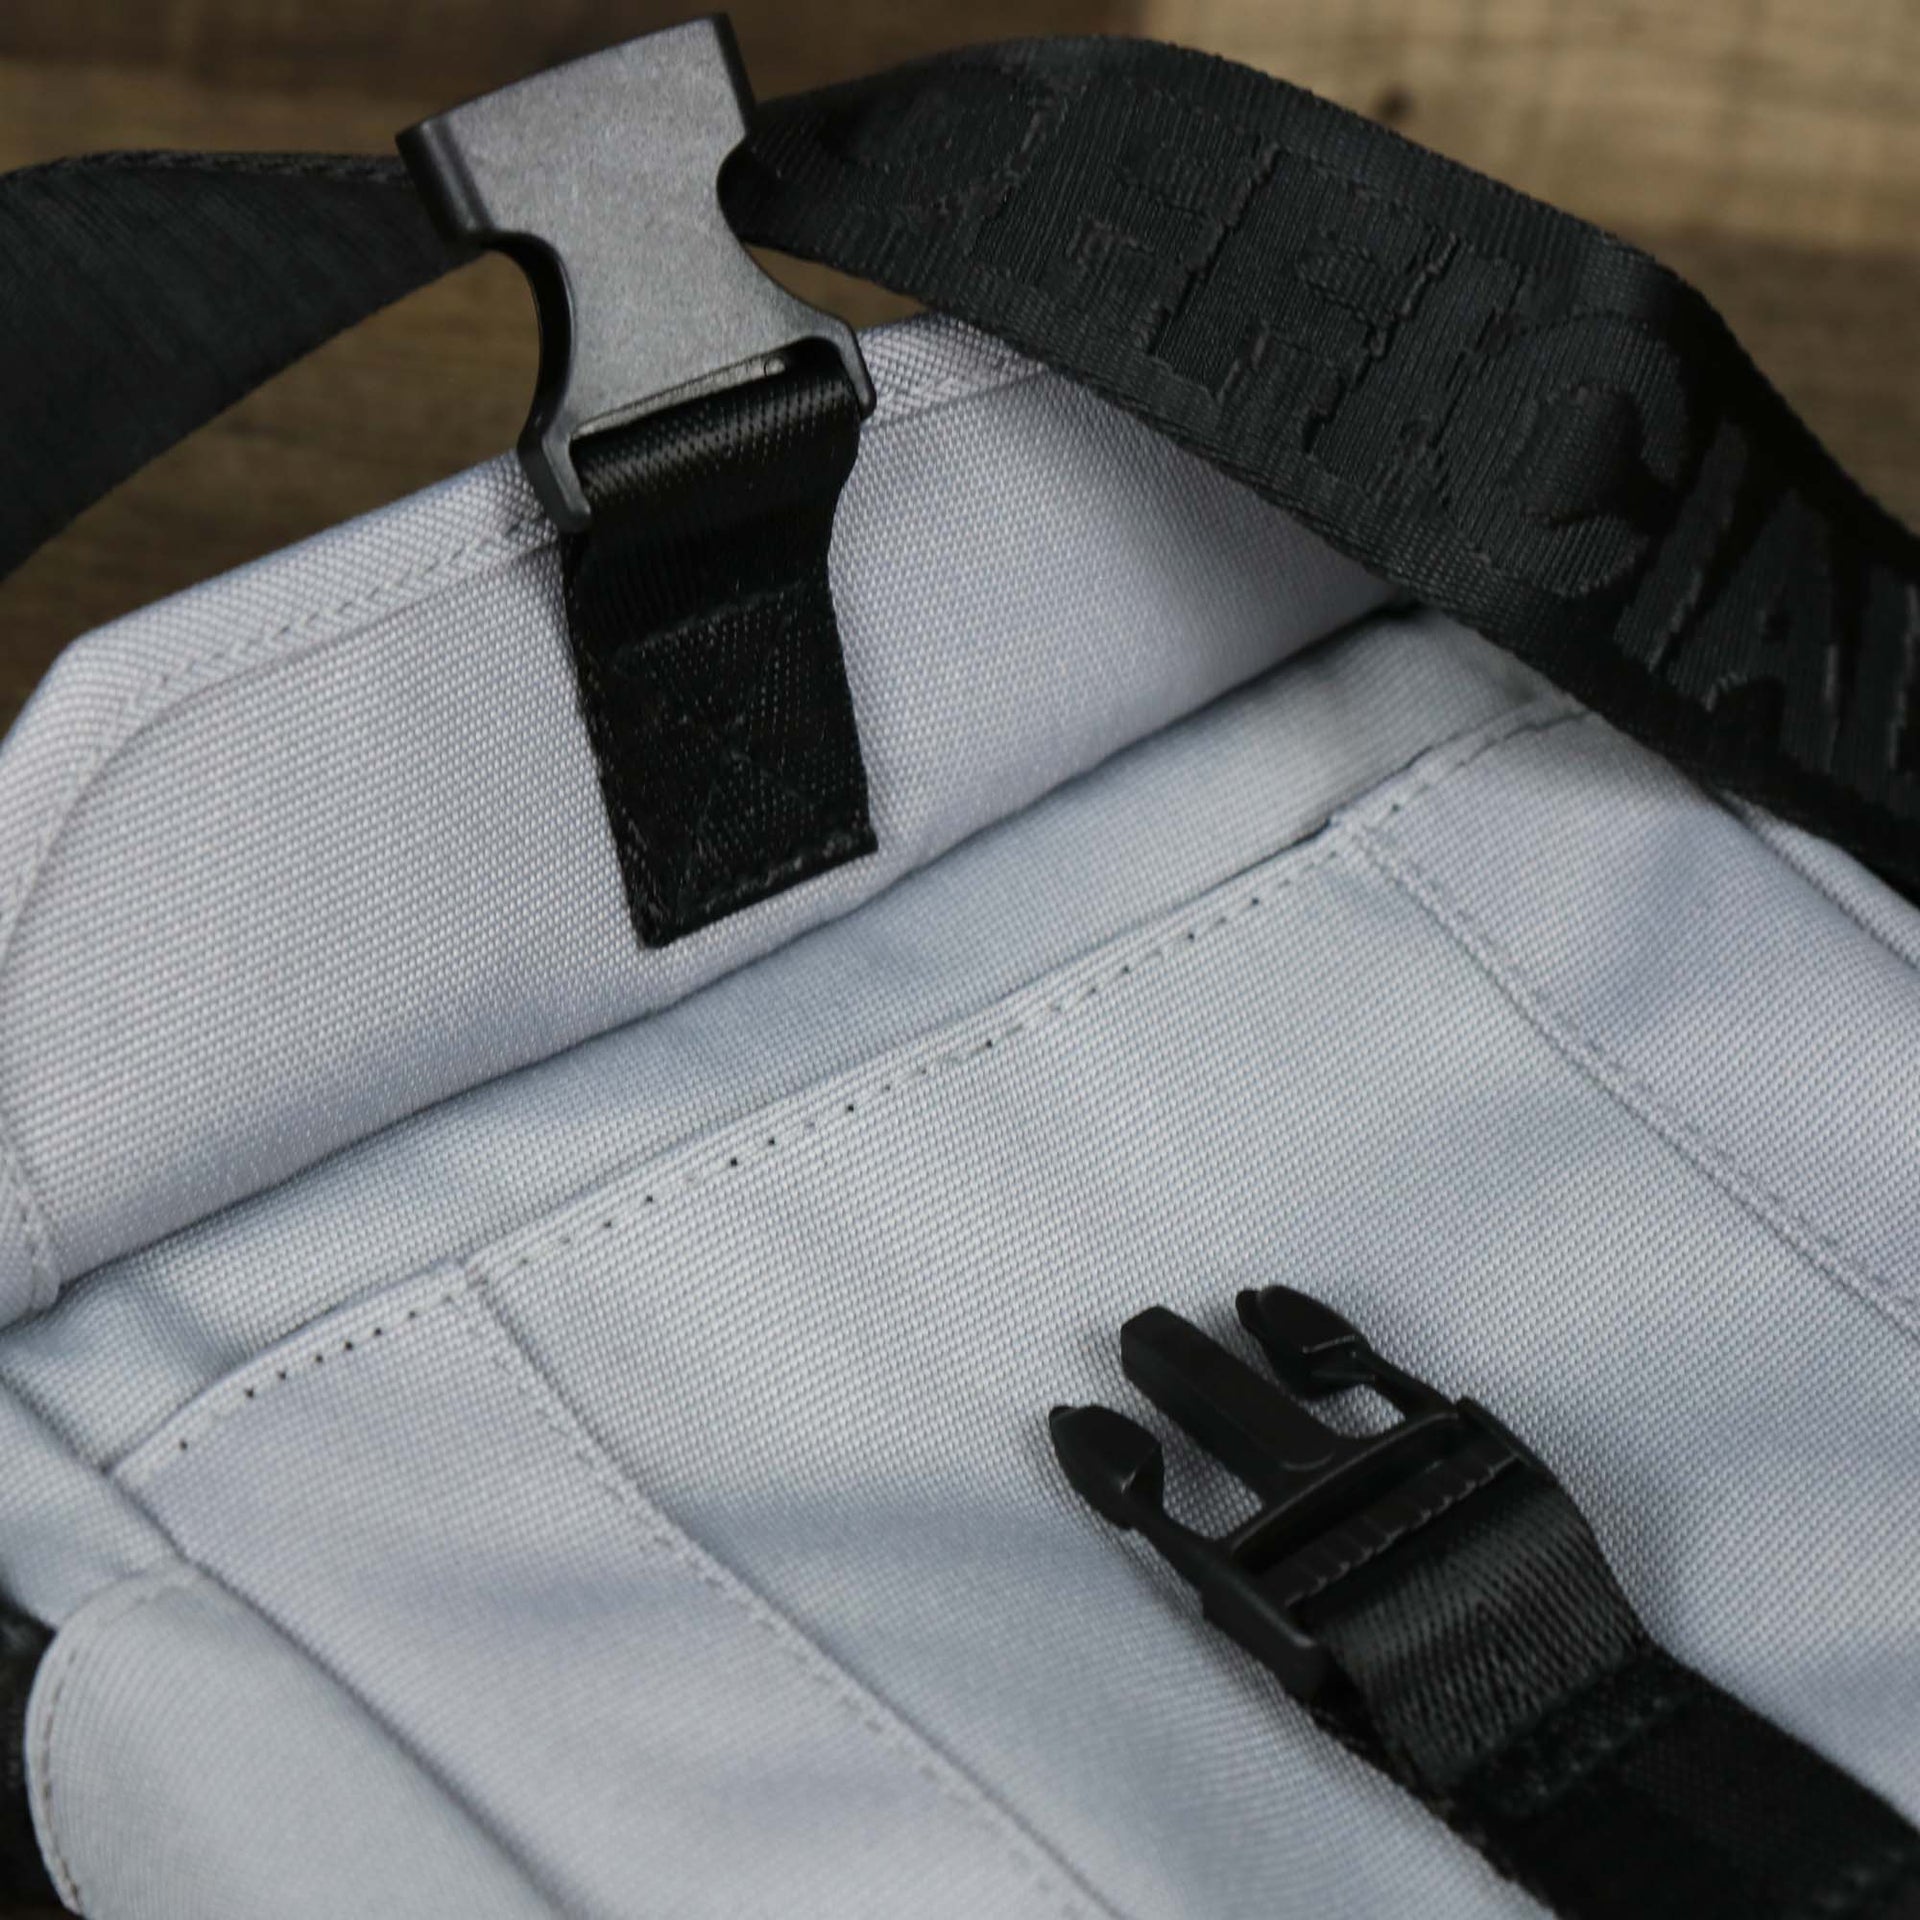 The clasp open on the Essential Nylon Shoulder Bag Streetwear with Mesh Pocket | Official Gray